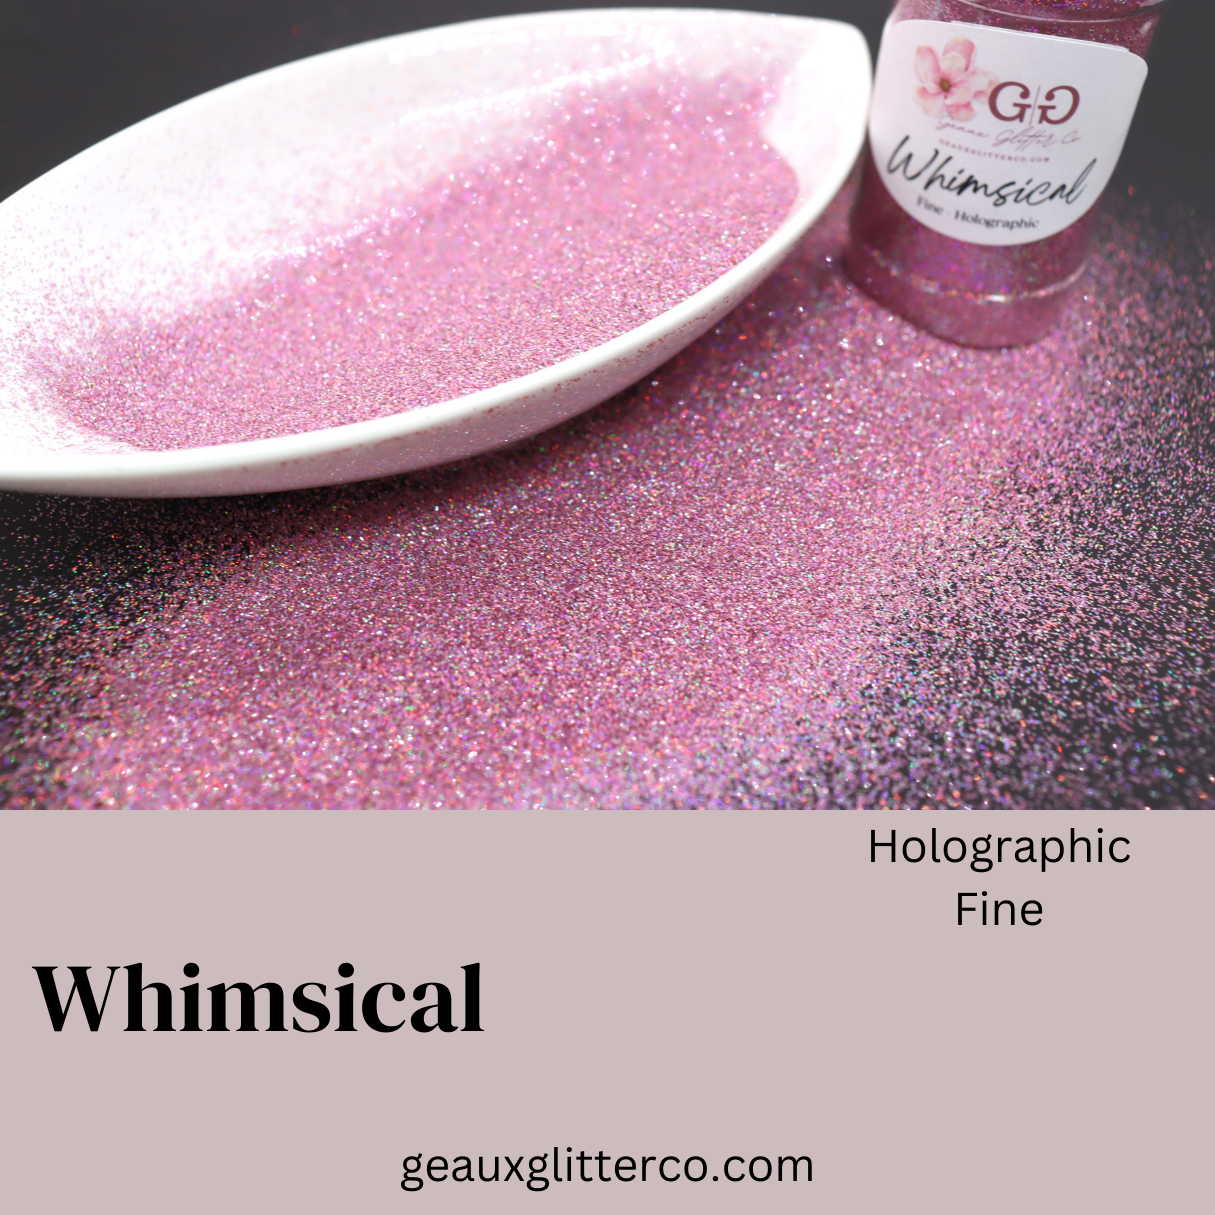 Whimsical Fine - Holographic